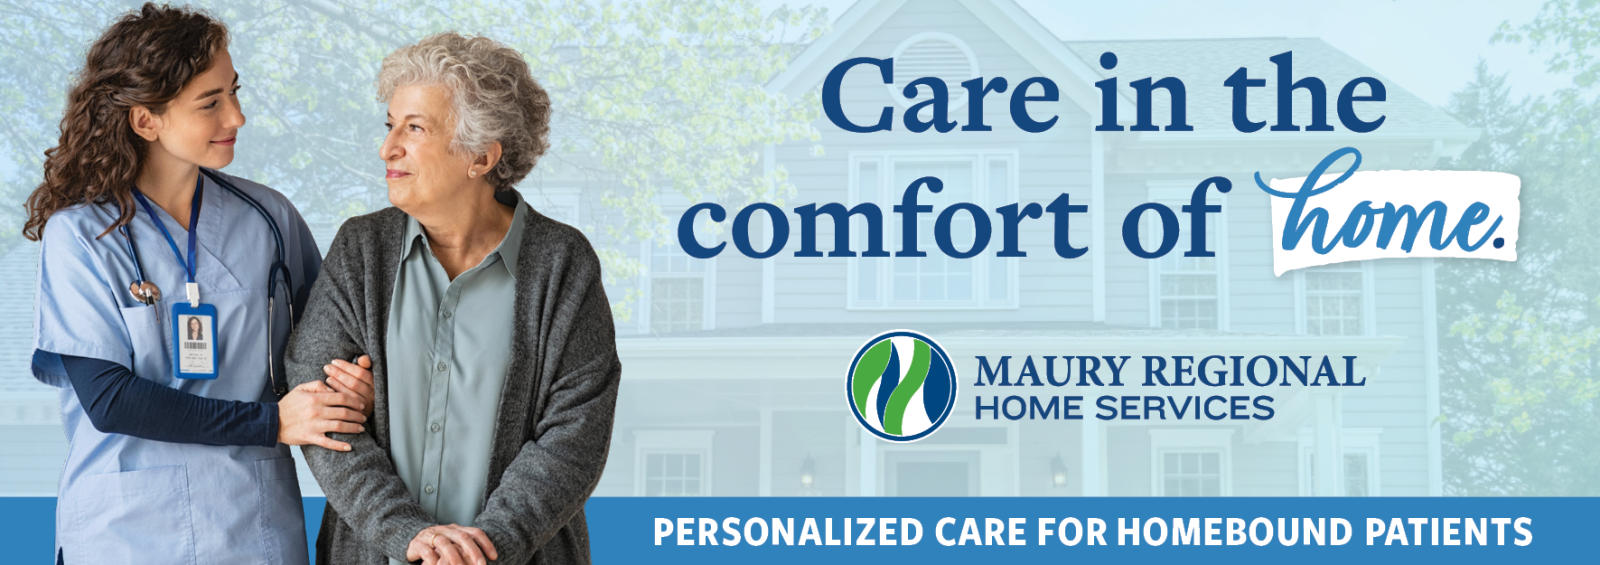 A home health nurse and patient walk arm-in-arm. Text reads, "Care in the comfort of home."